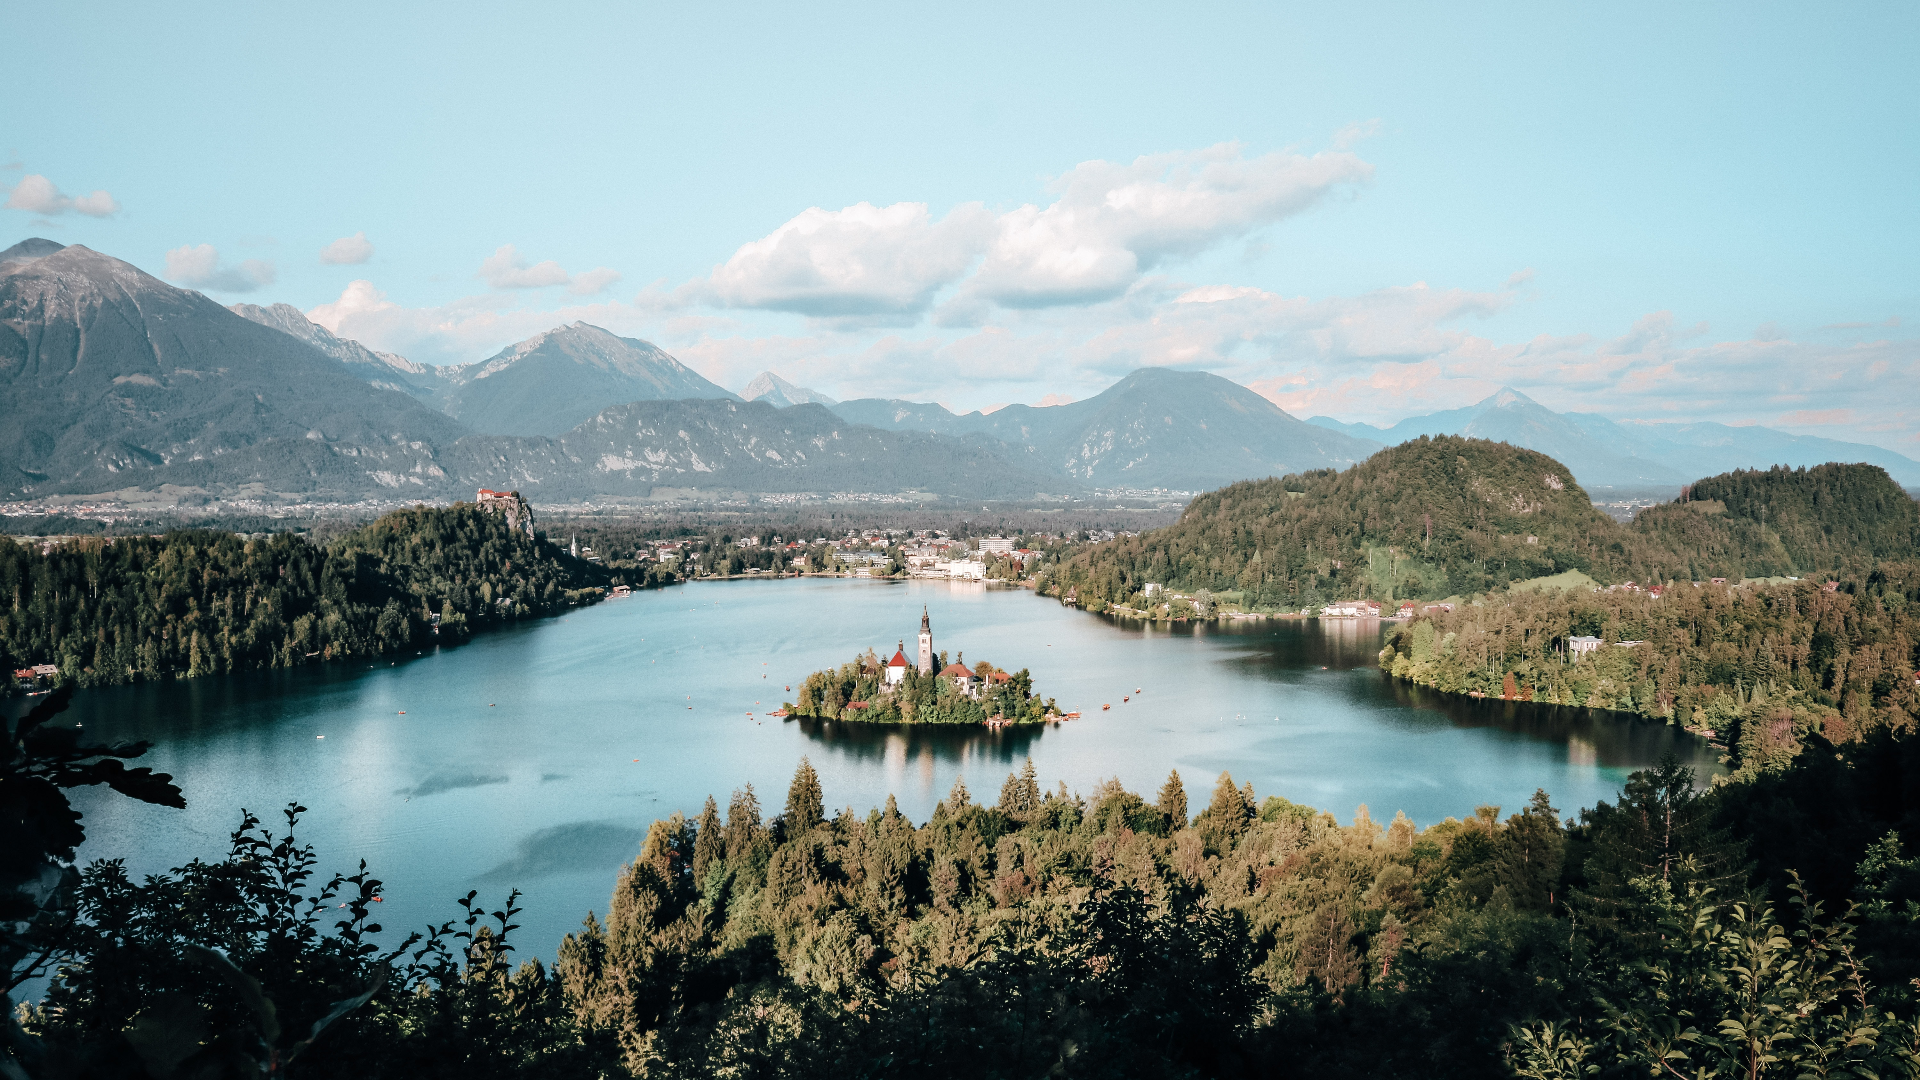 General 1920x1080 nature landscape mountains sky clouds lake water trees village Slovenia Lake Bled island